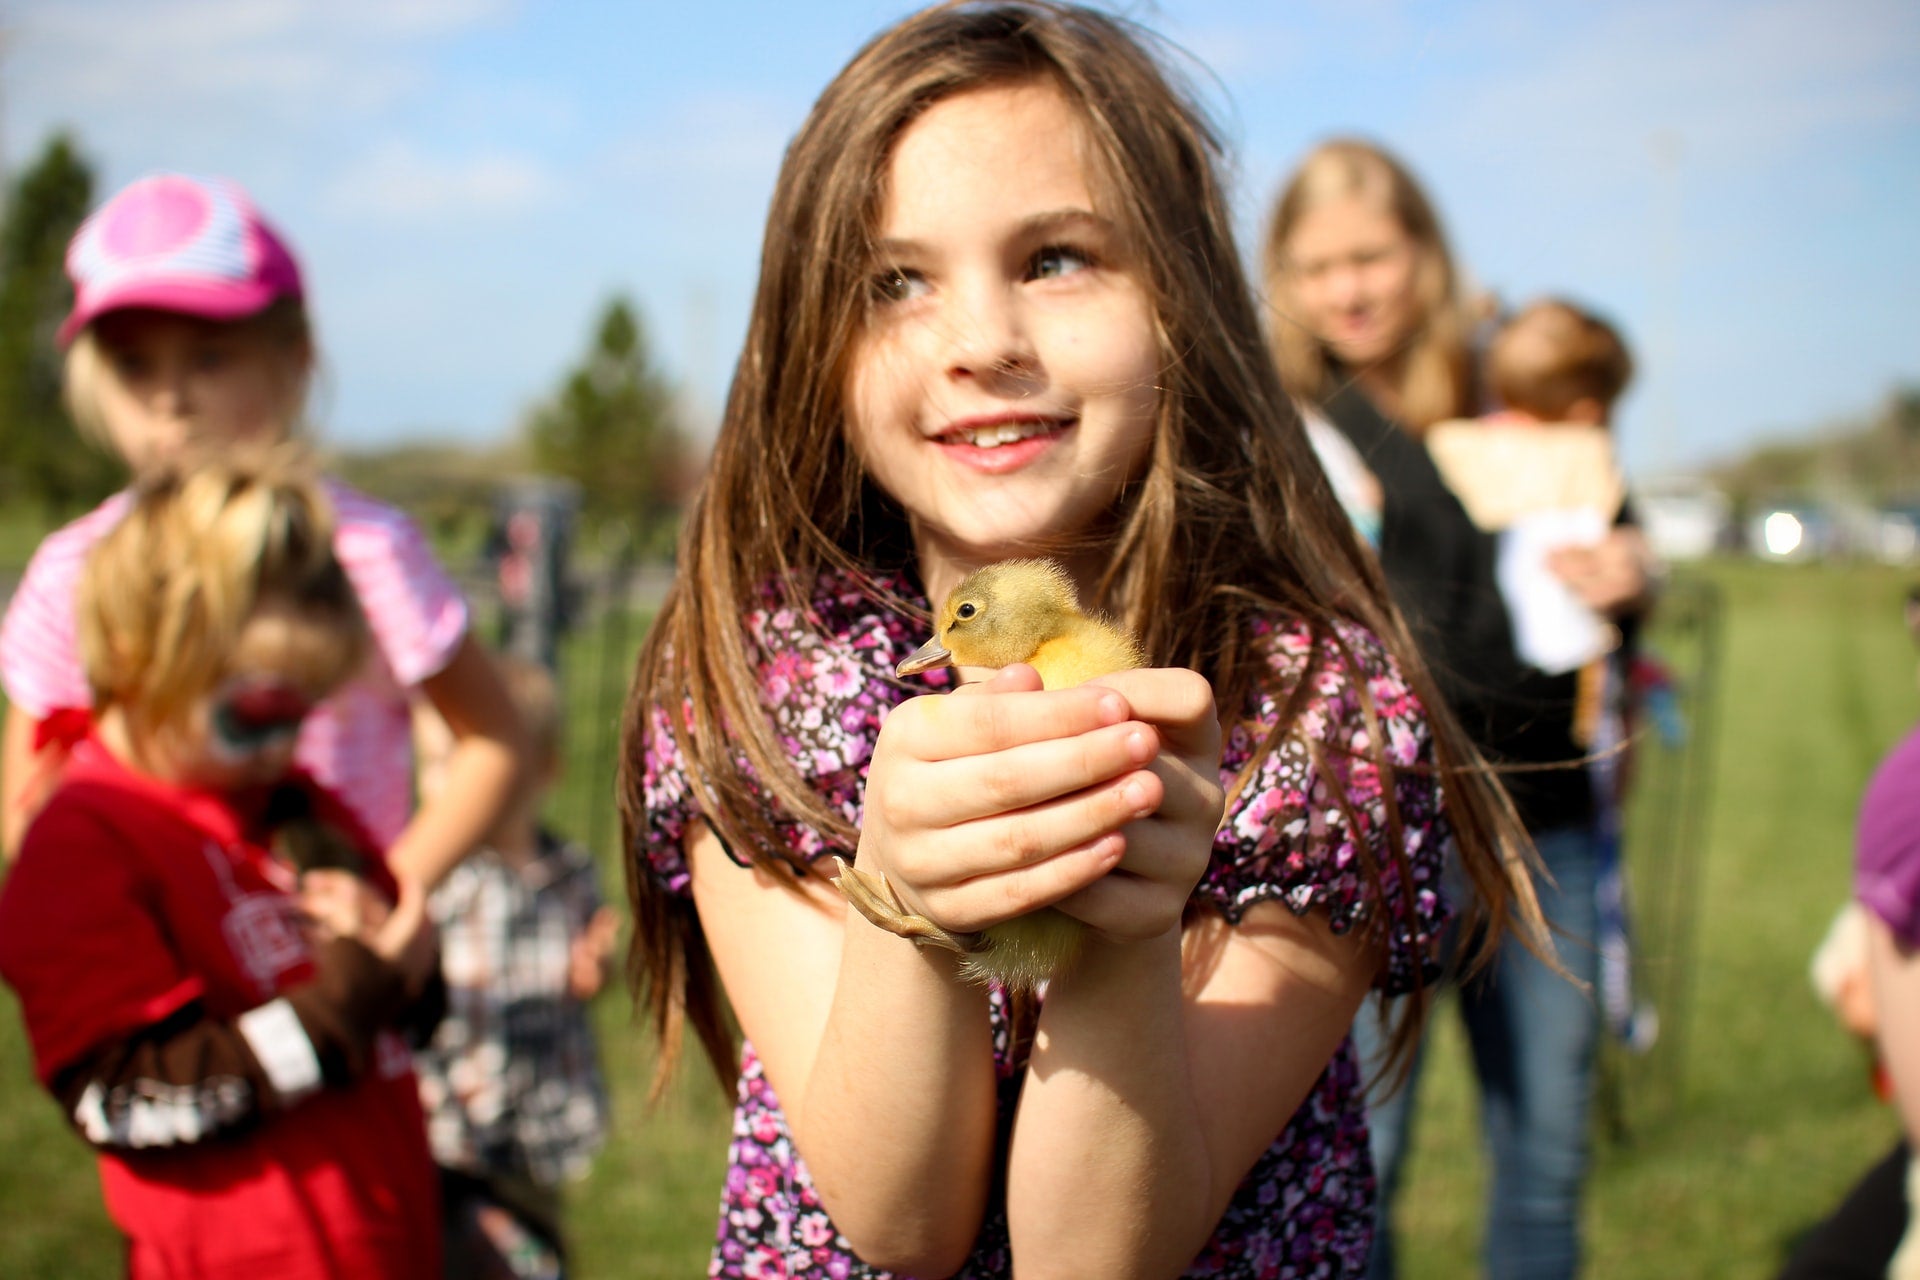 a girl holding a ducky in fron of her family members